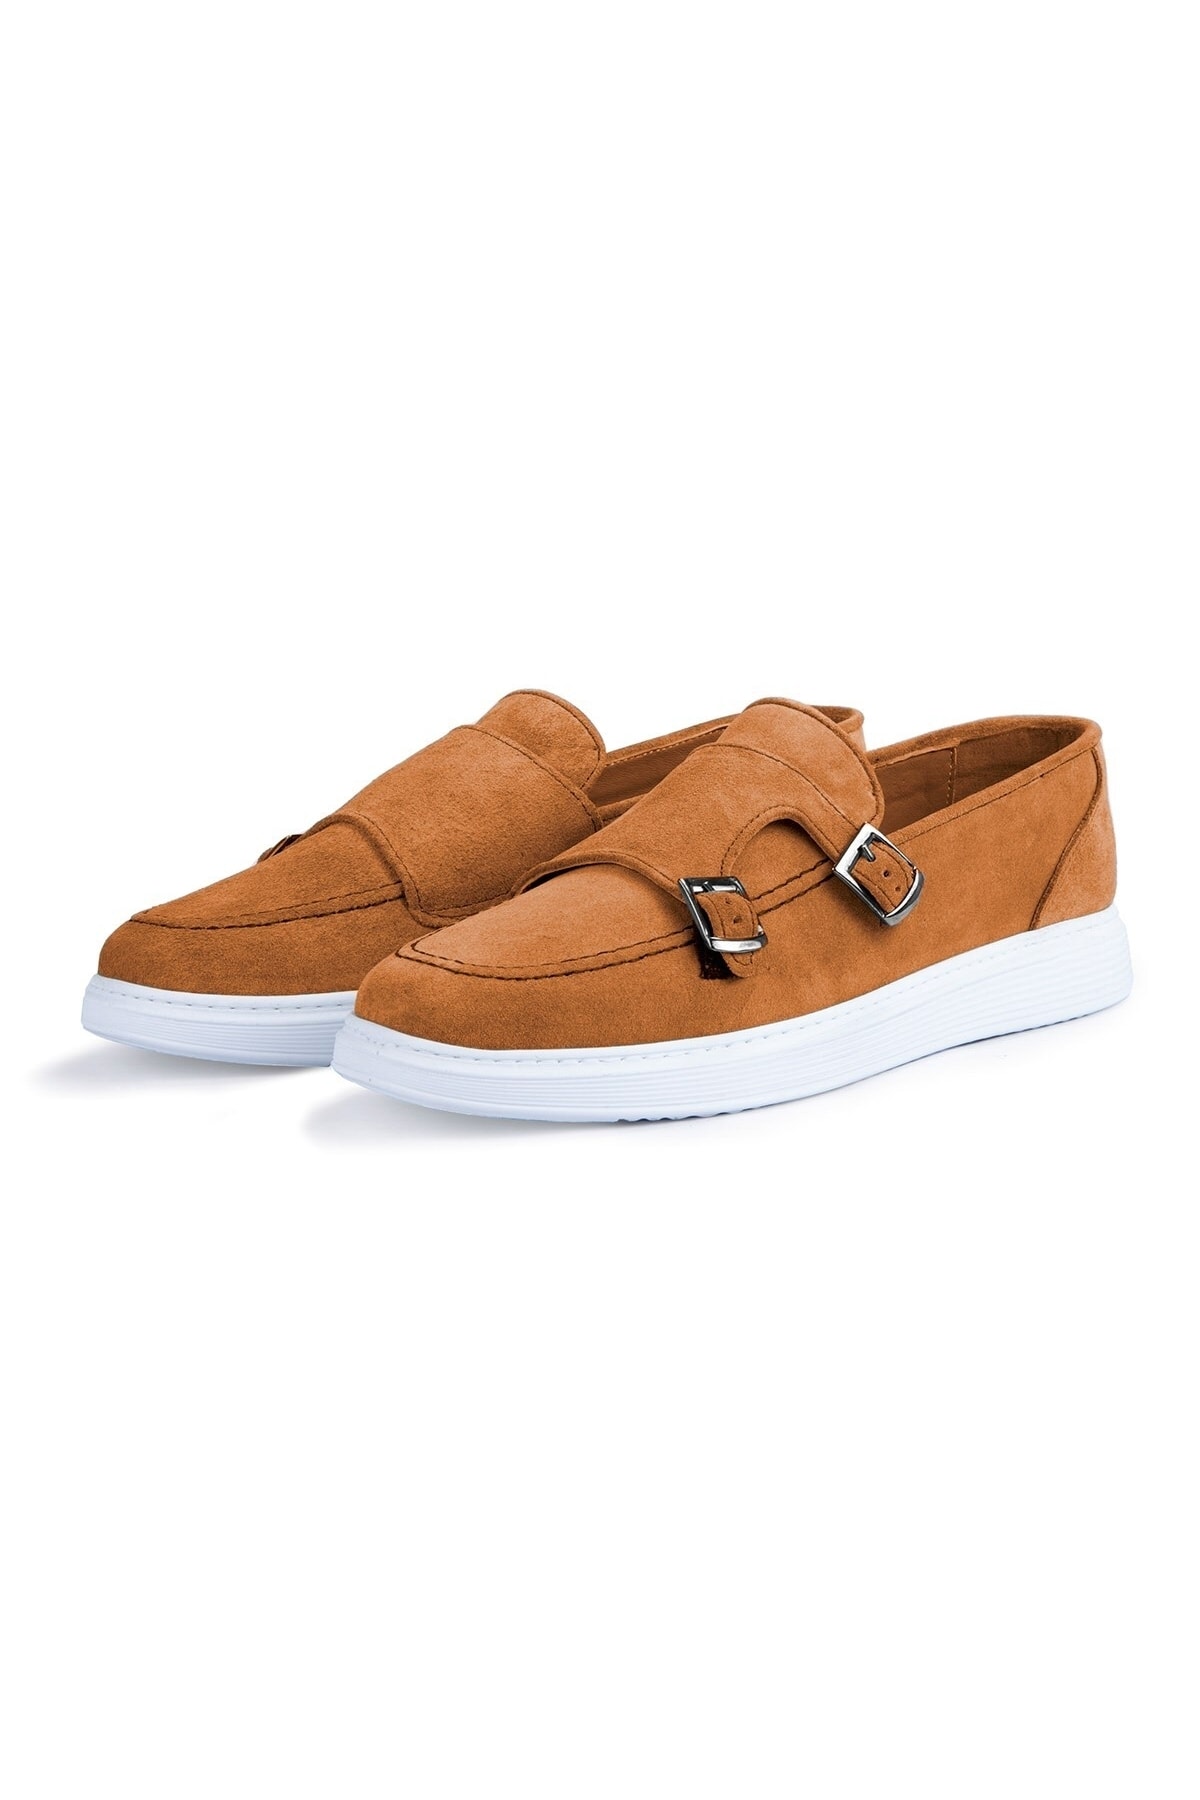 Ducavelli Airy Genuine Leather and Suede Men's Casual Shoes, Suede Loafers, Summer Shoes Tan.